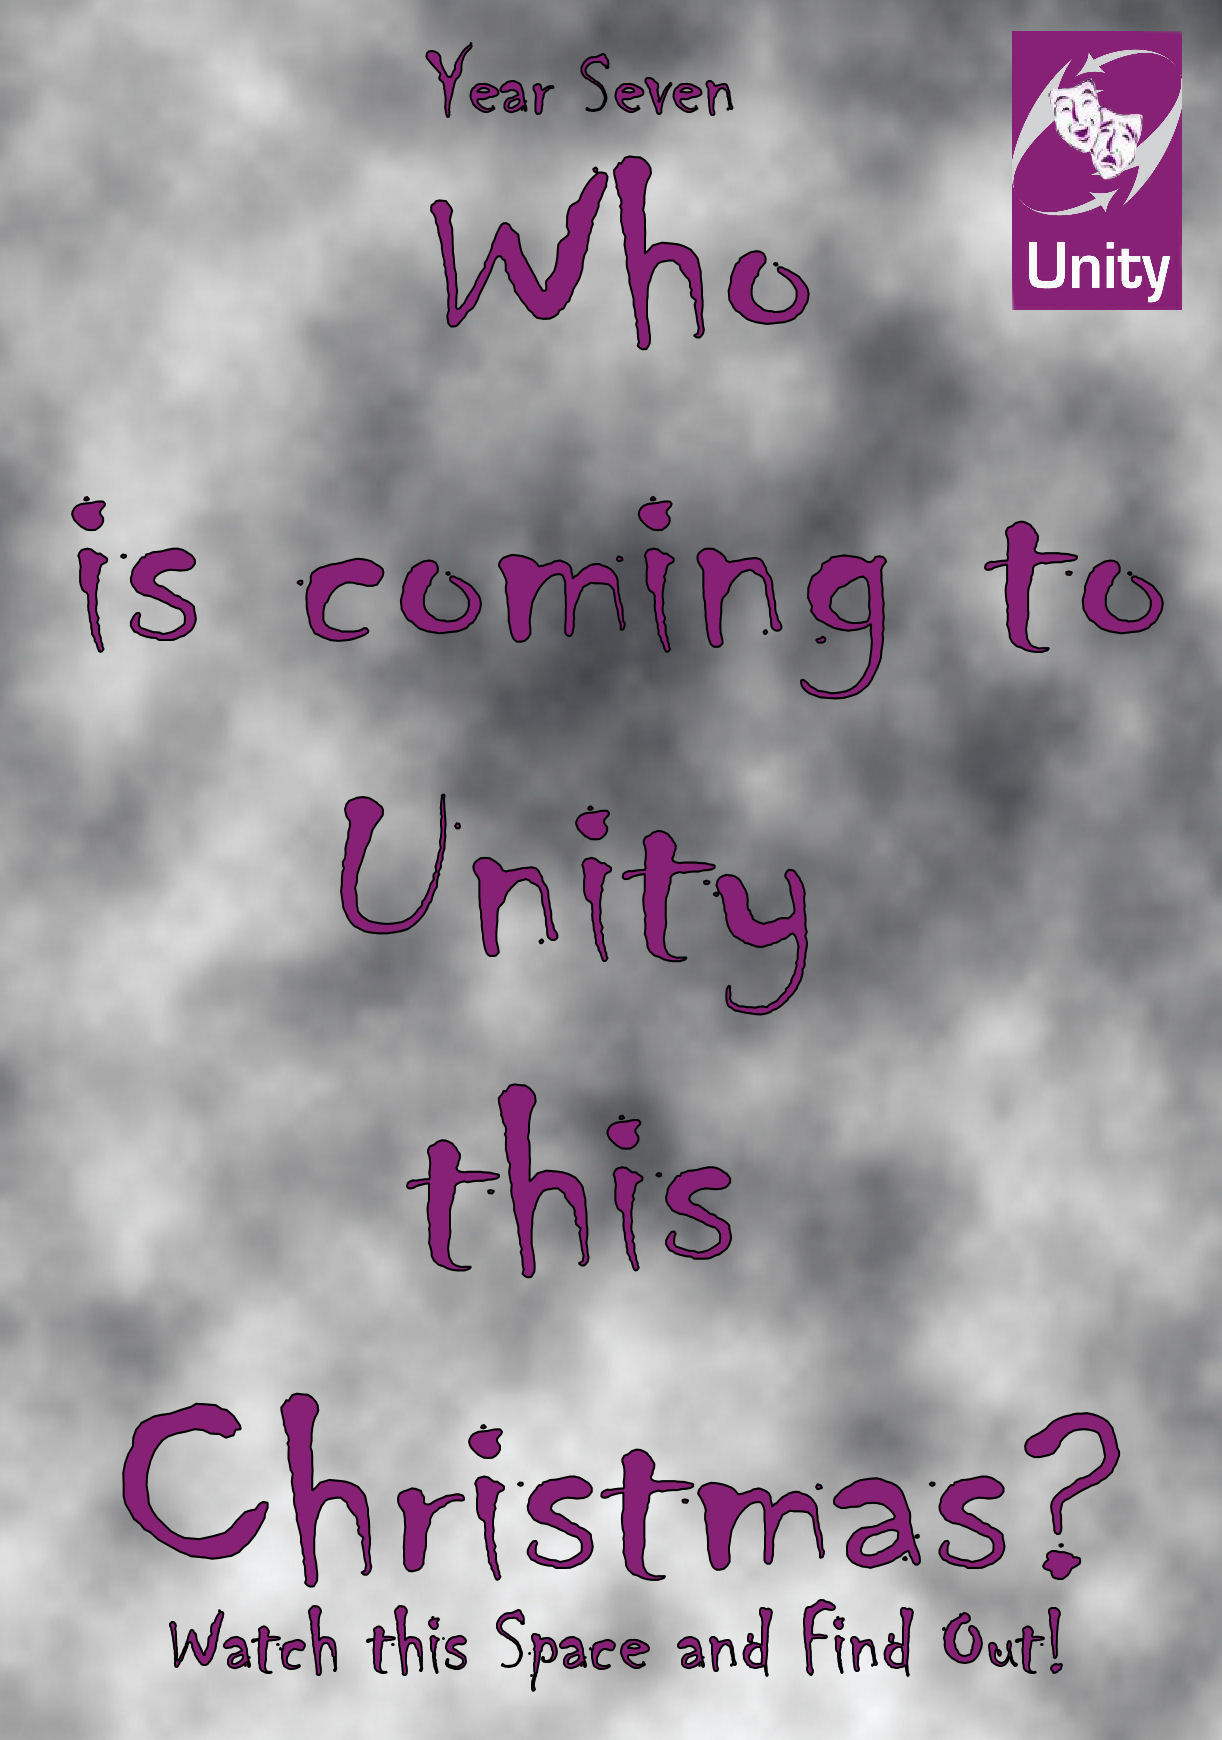 Who's coming to Unity?